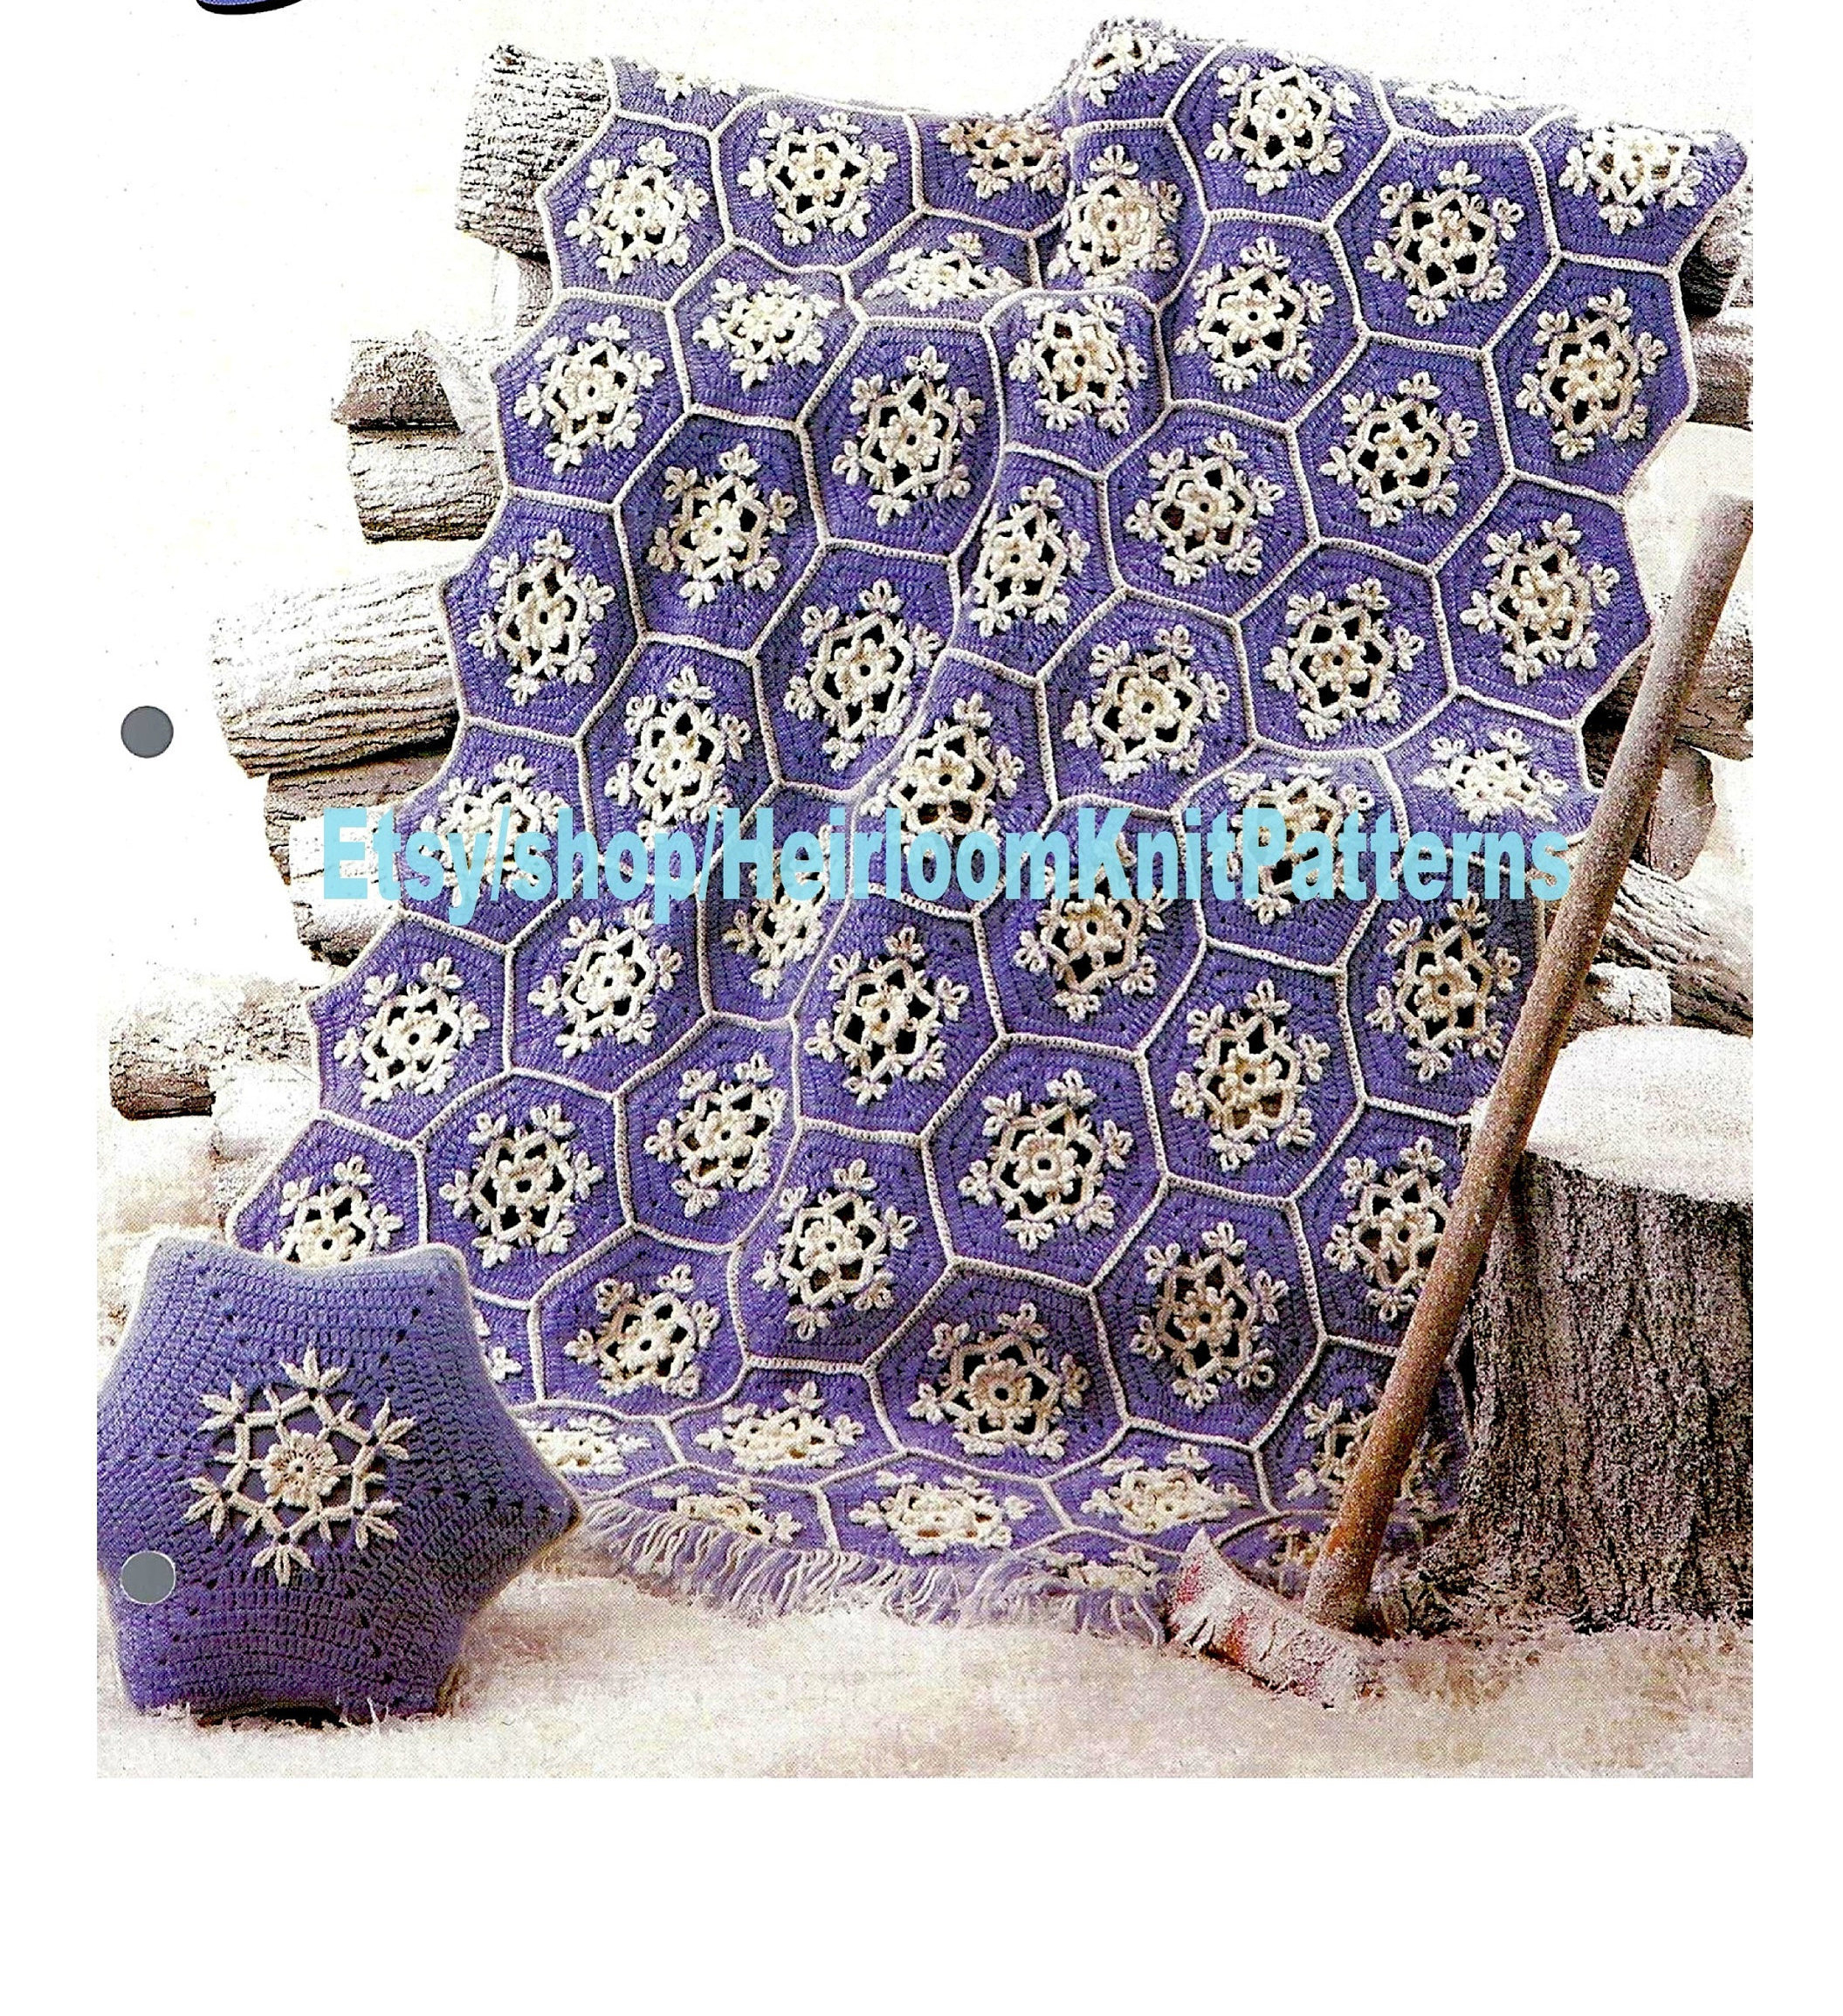 Snowflake Blanket Crochet Pattern Snowflake Afghan And Pillow Crochet Pattern In Worsted Etsy